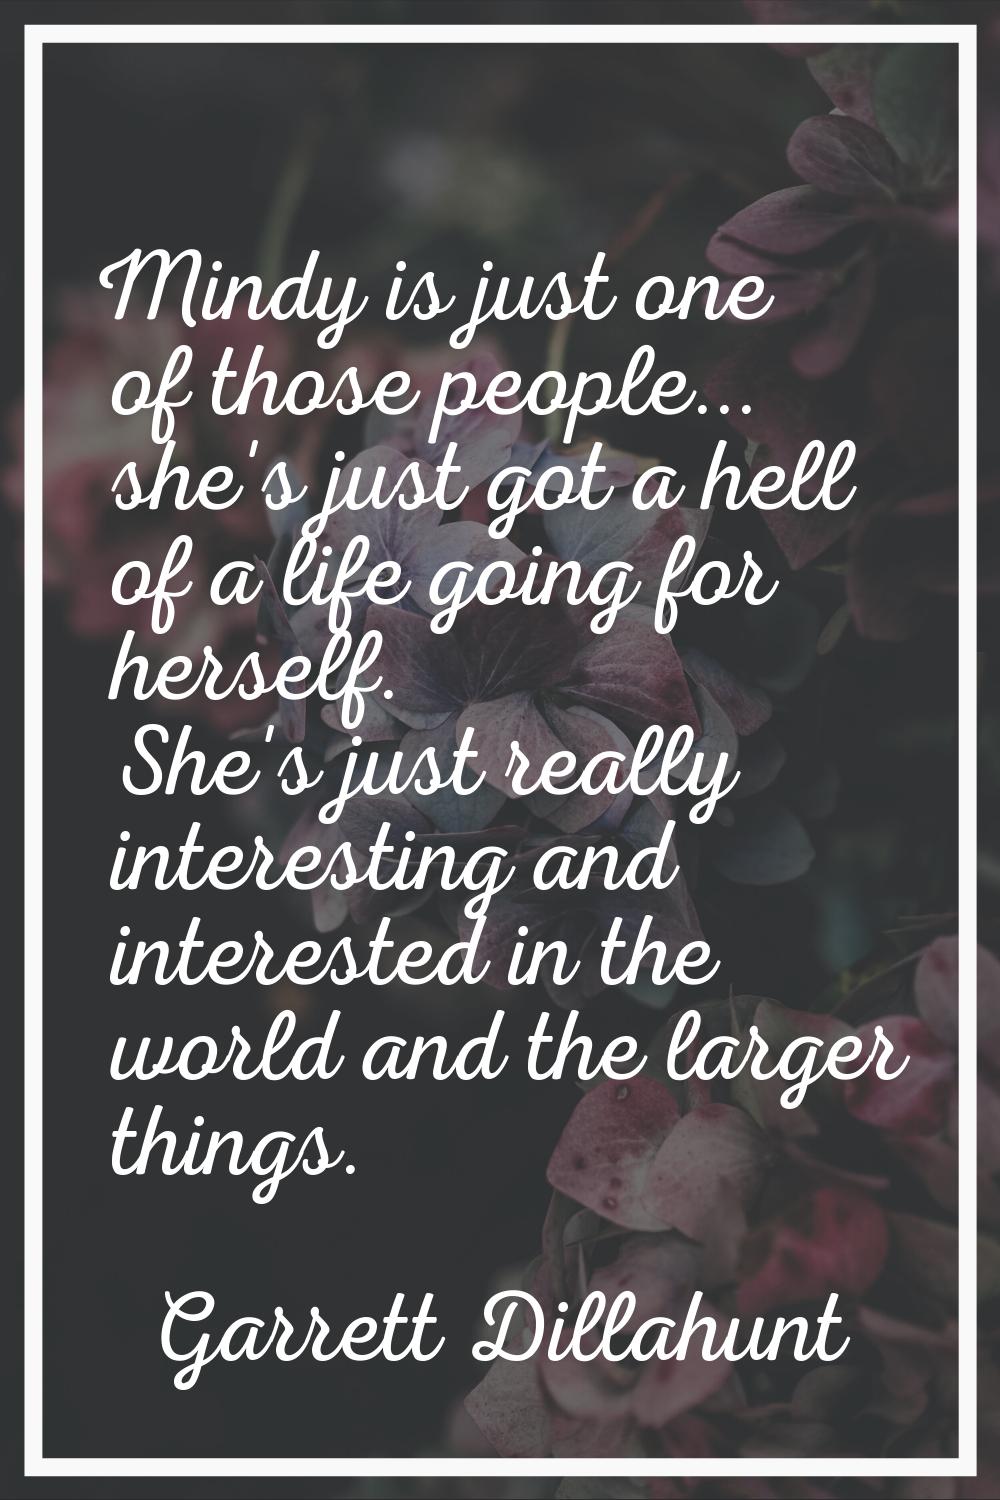 Mindy is just one of those people... she's just got a hell of a life going for herself. She's just 